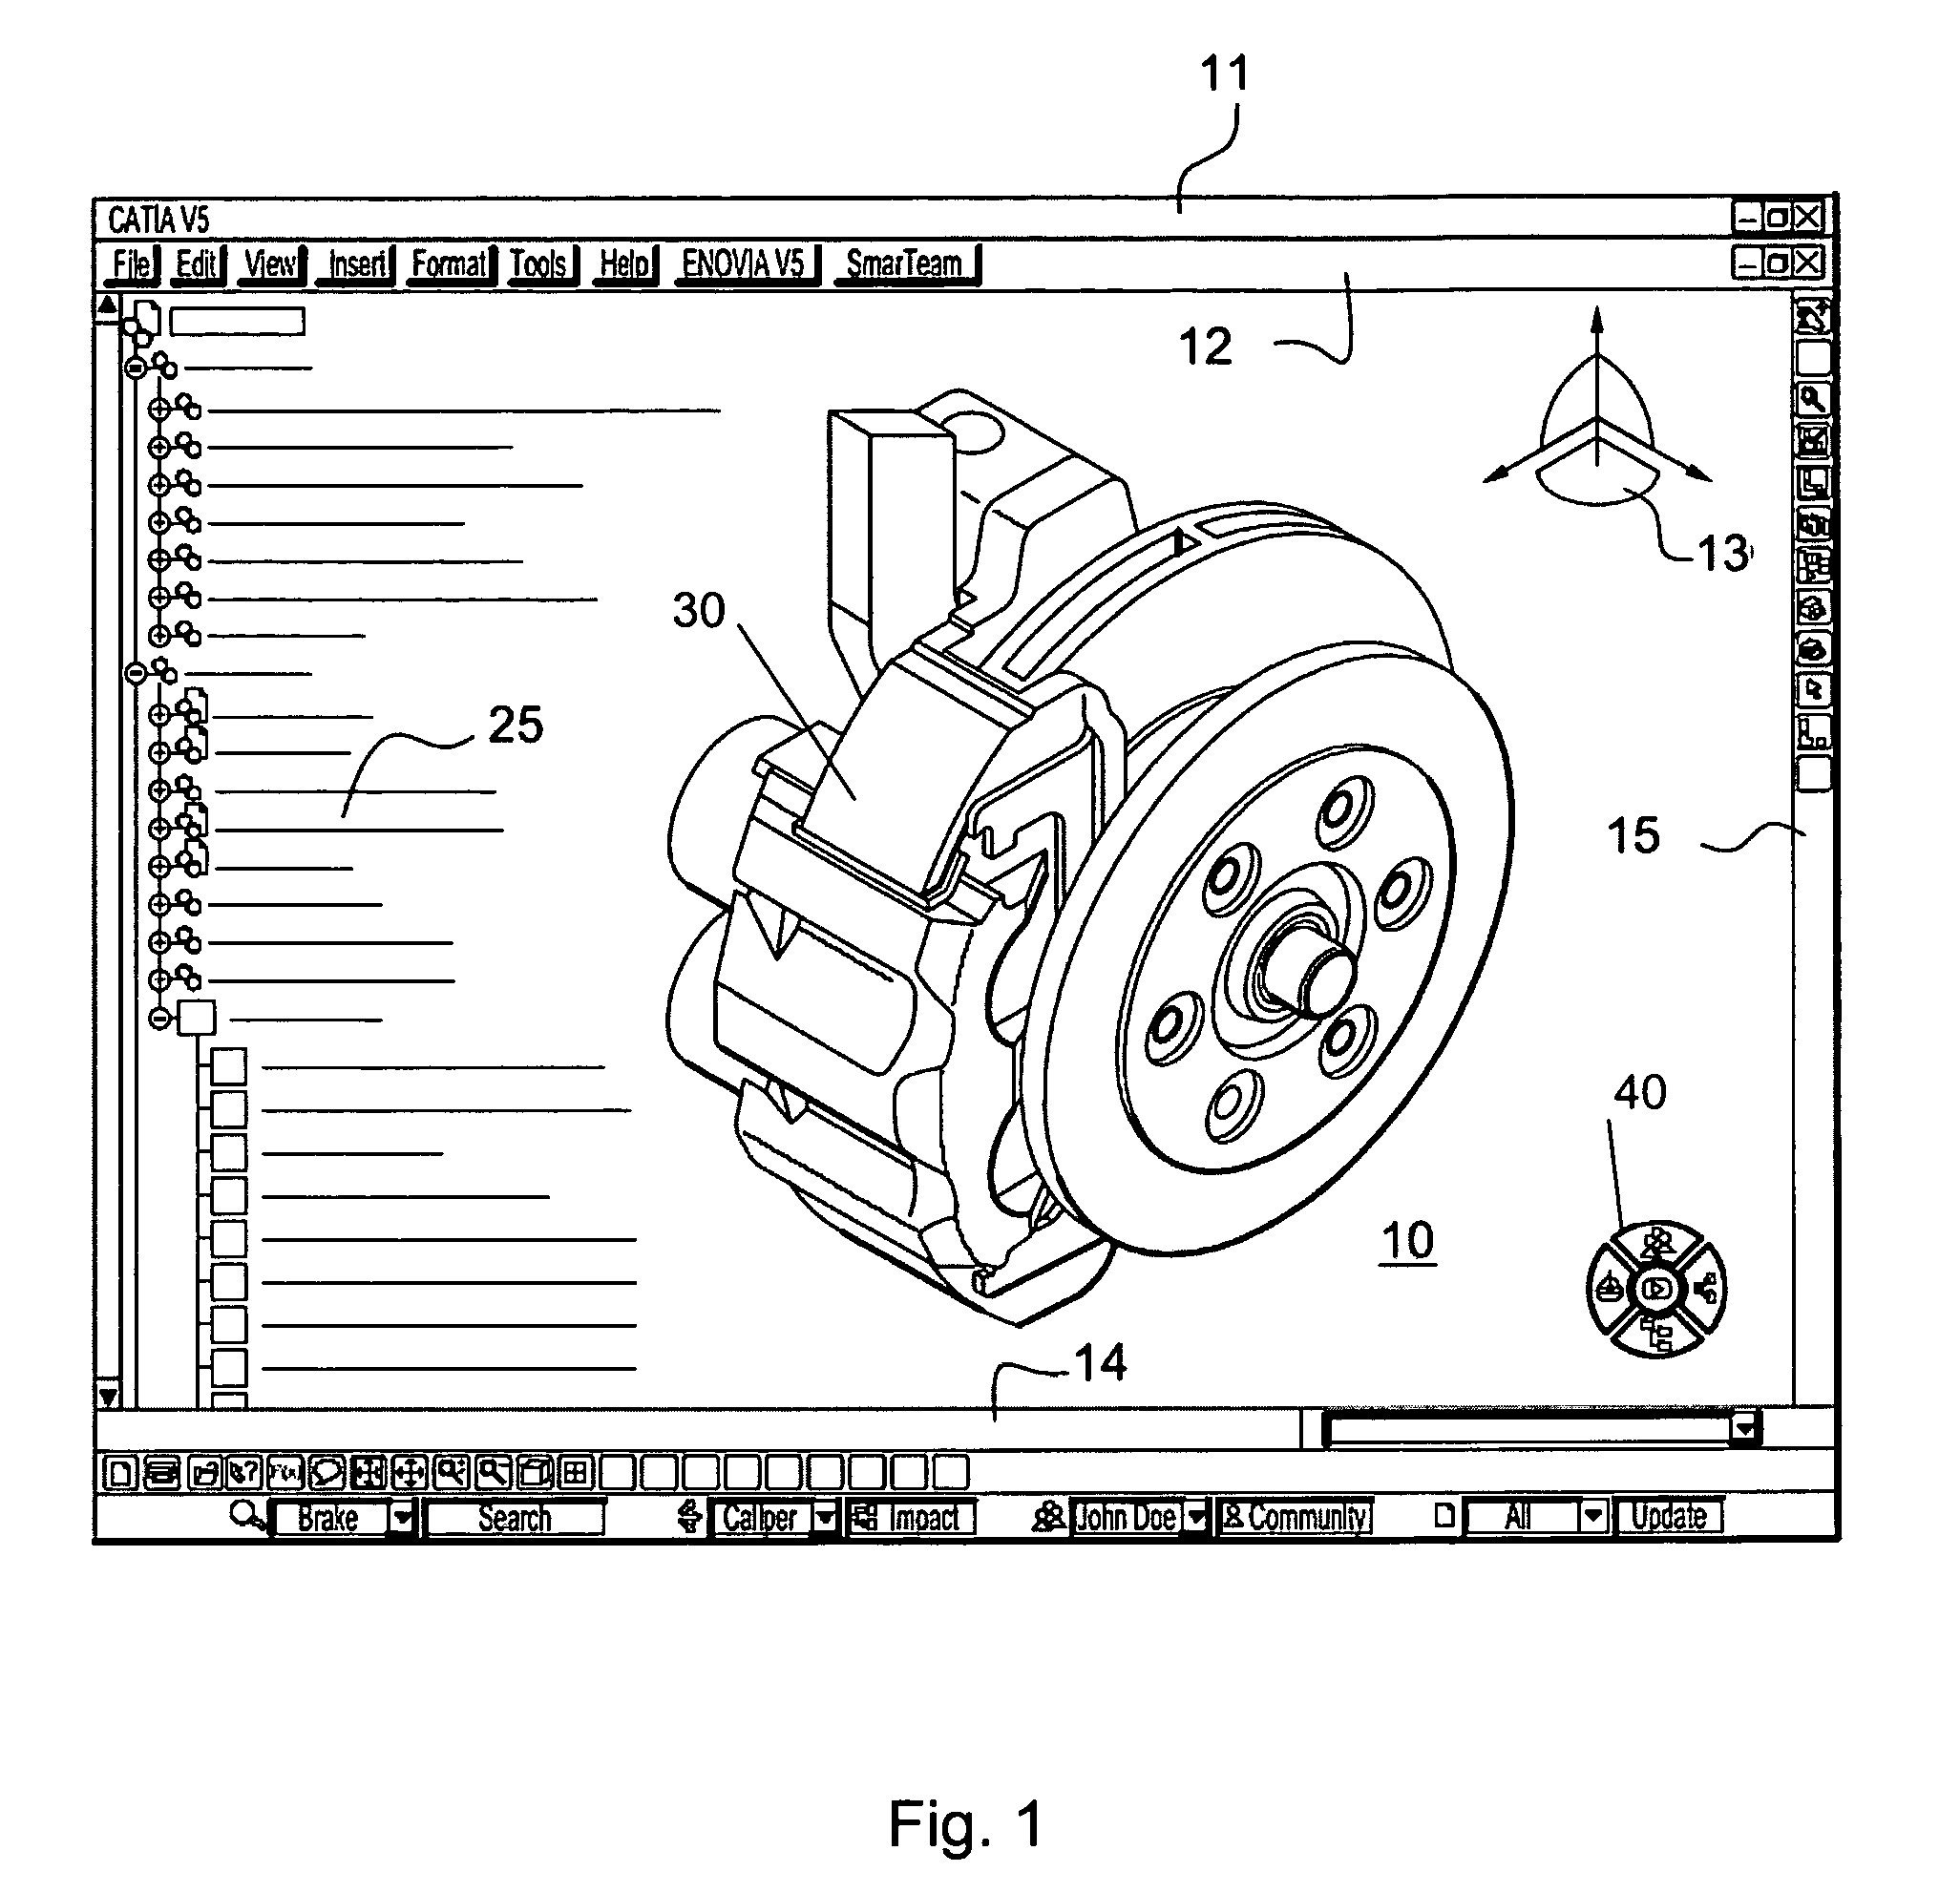 Process for selecting objects in a PLM database and apparatus implementing this process